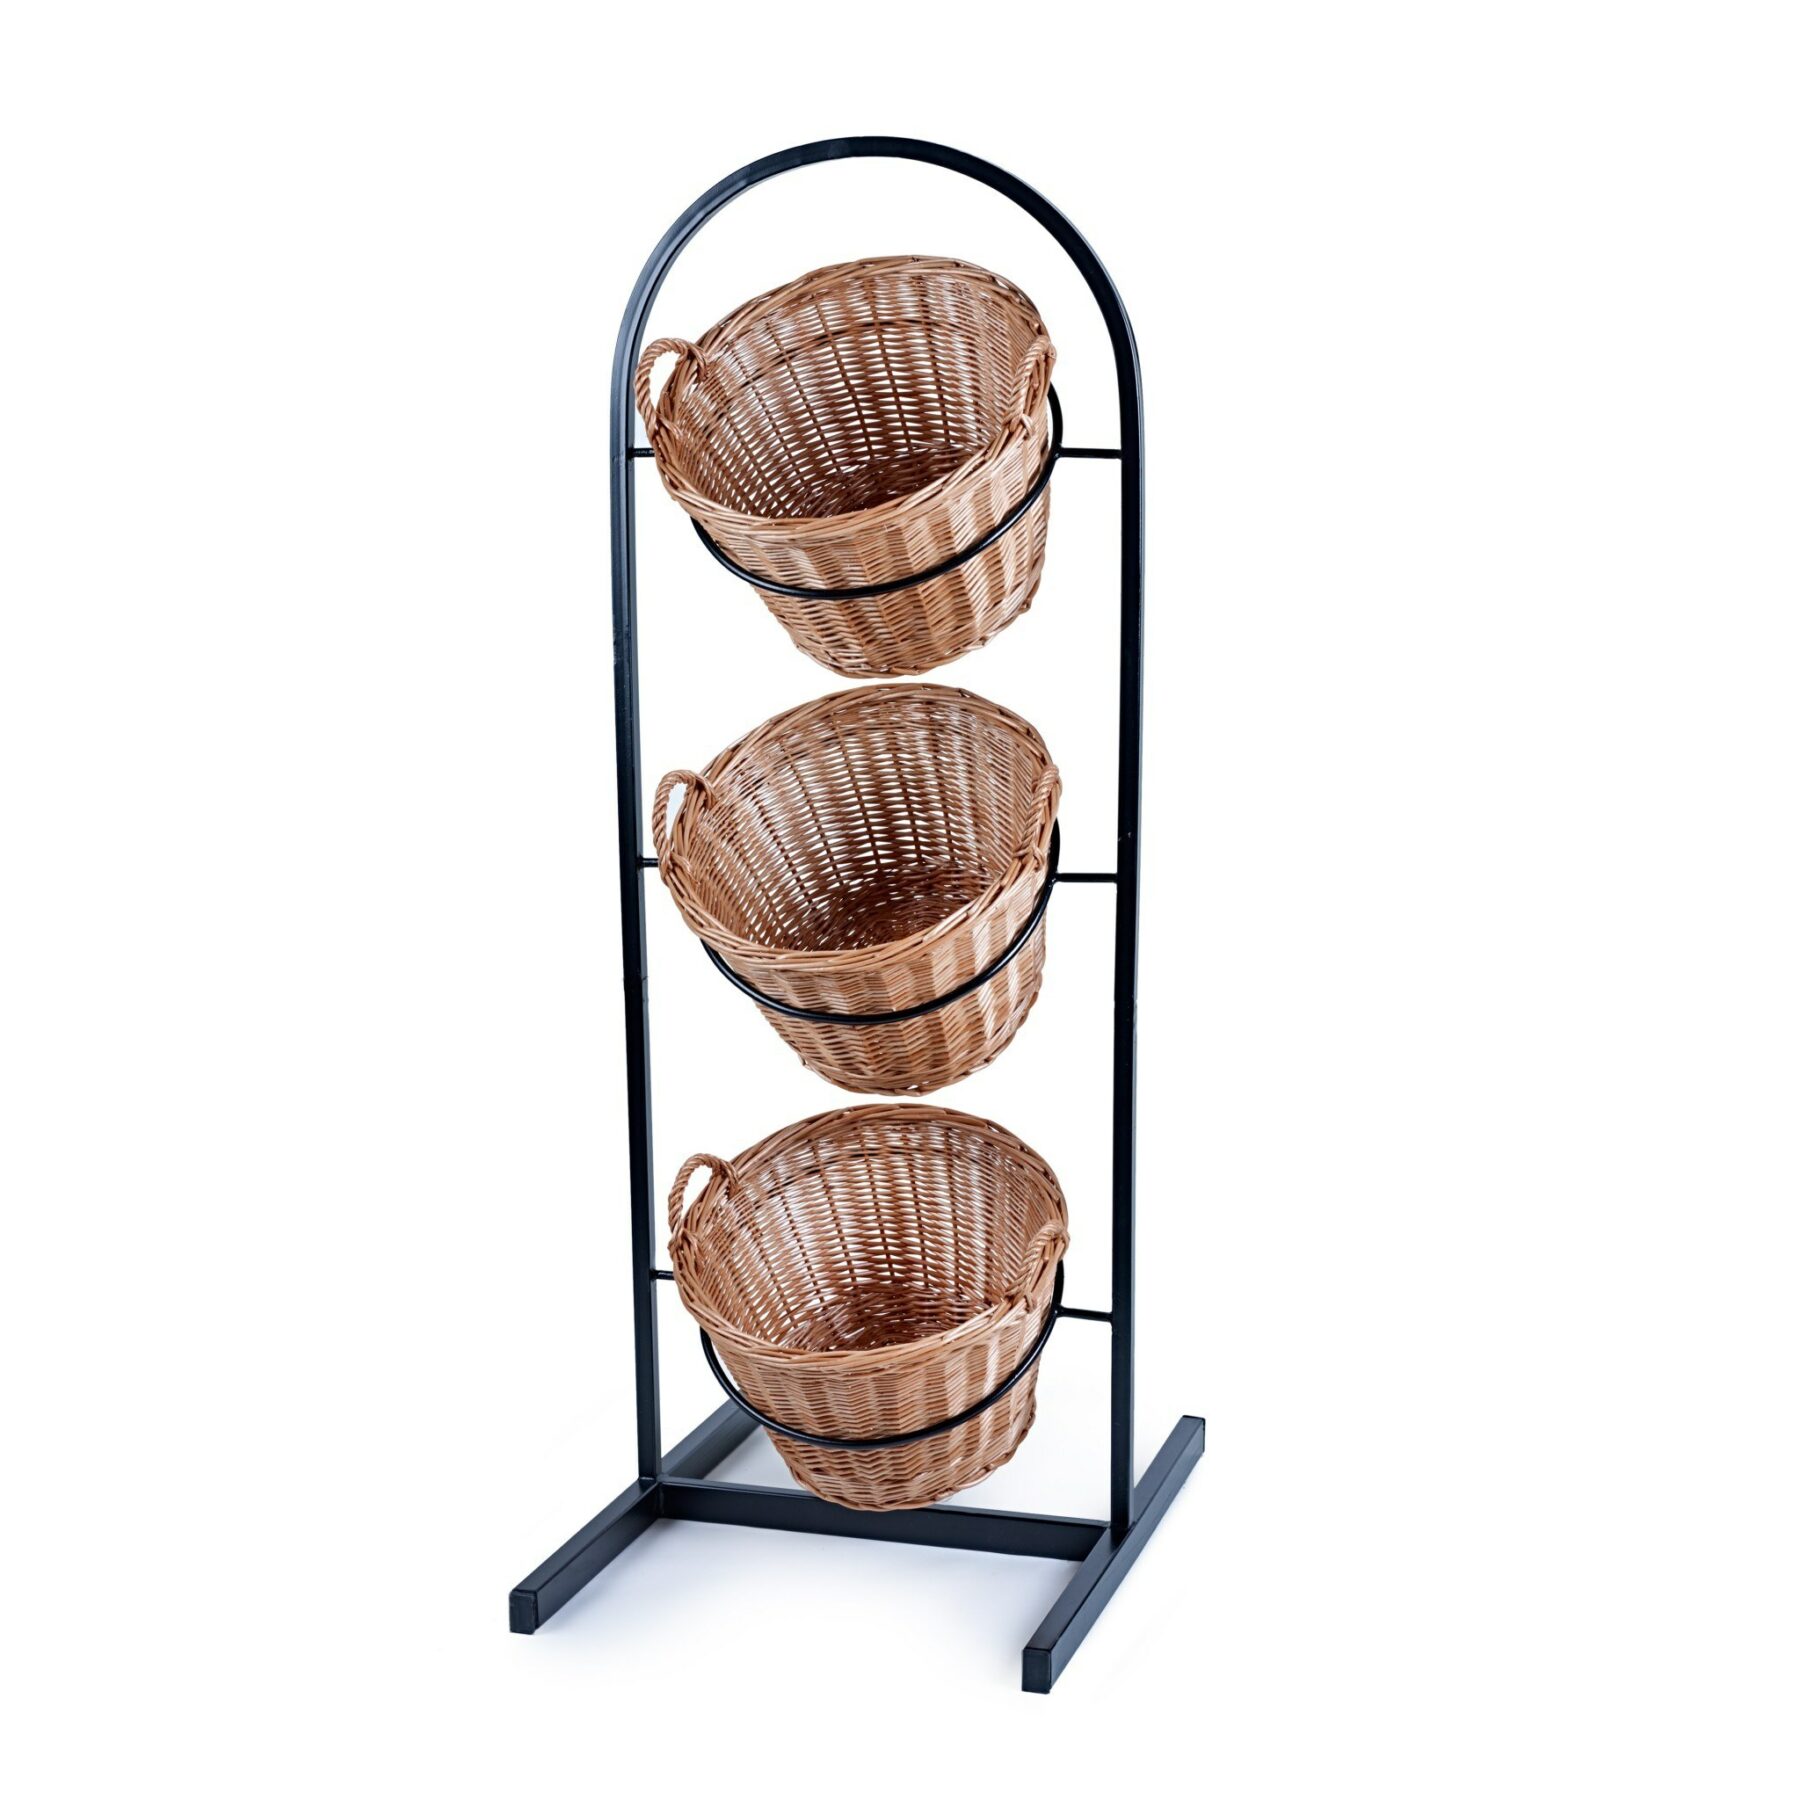 4 Tier Metal Display Stand with Baskets